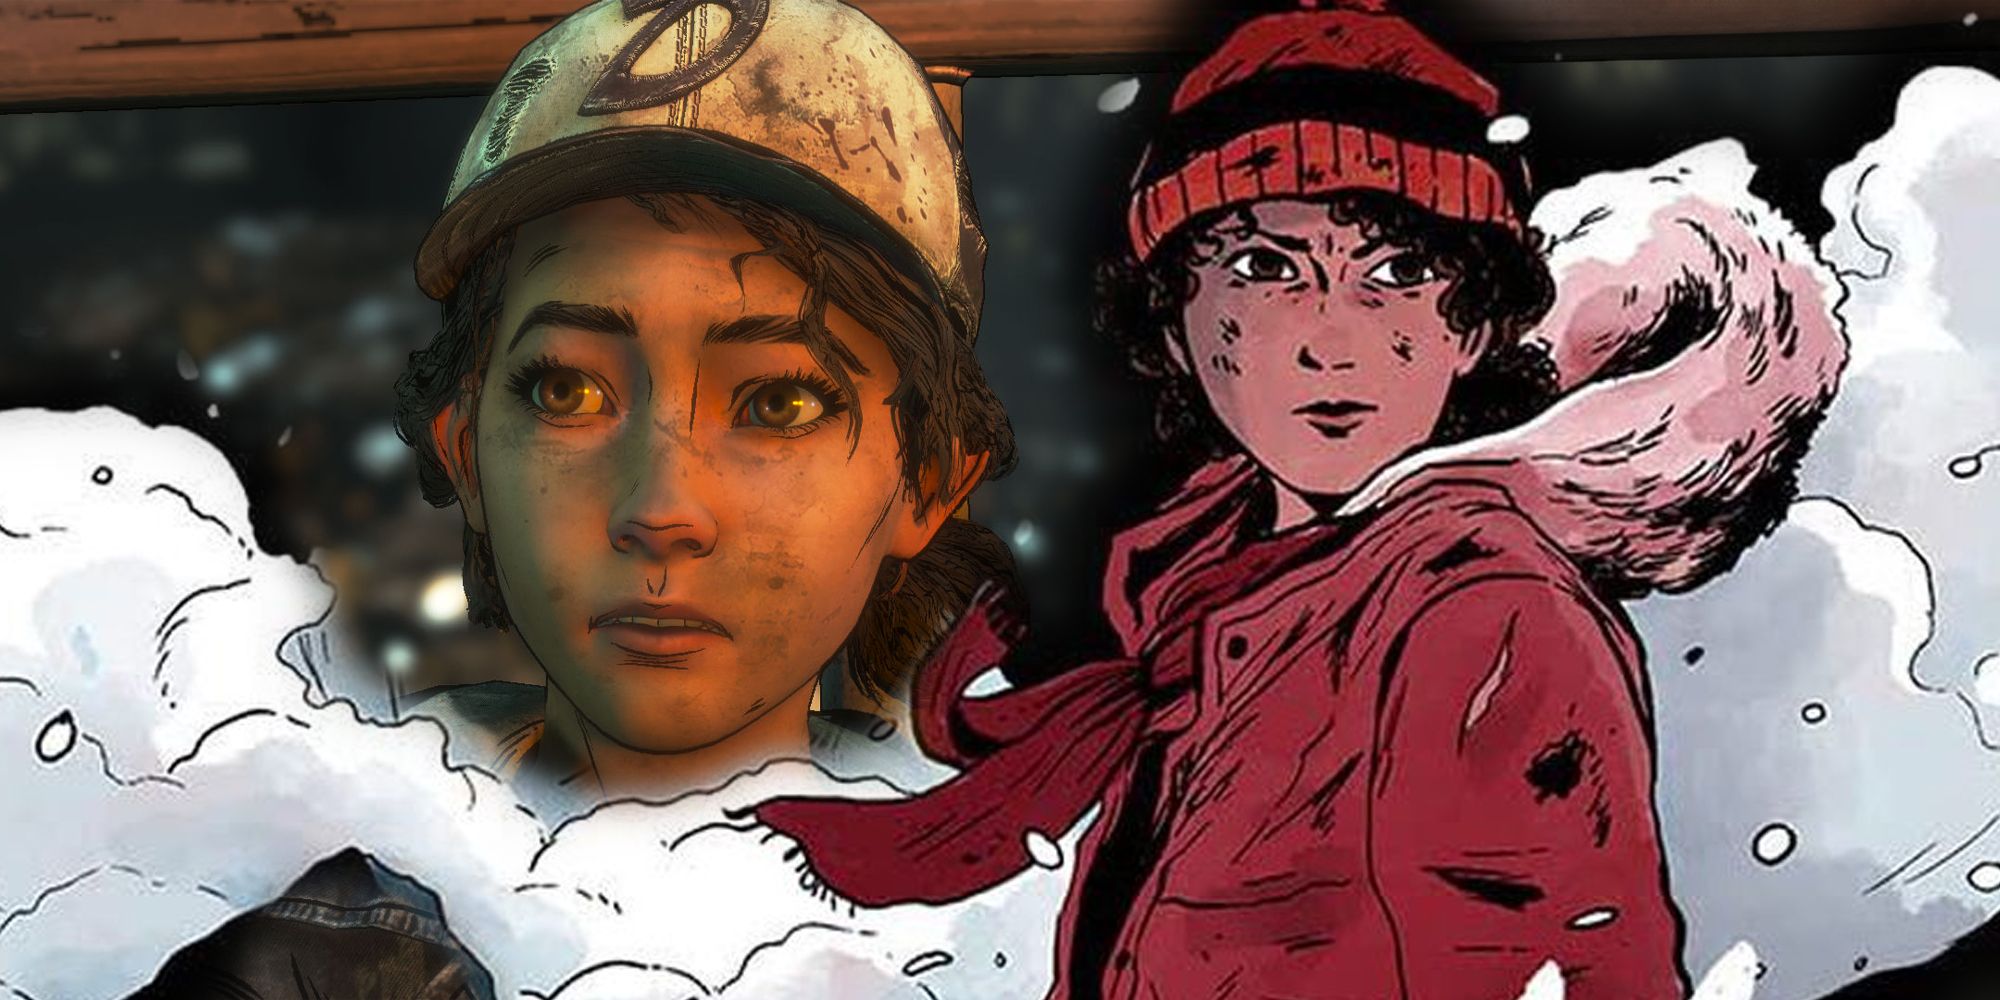 Clementine in The Walking Dead game and in her spin-off comic